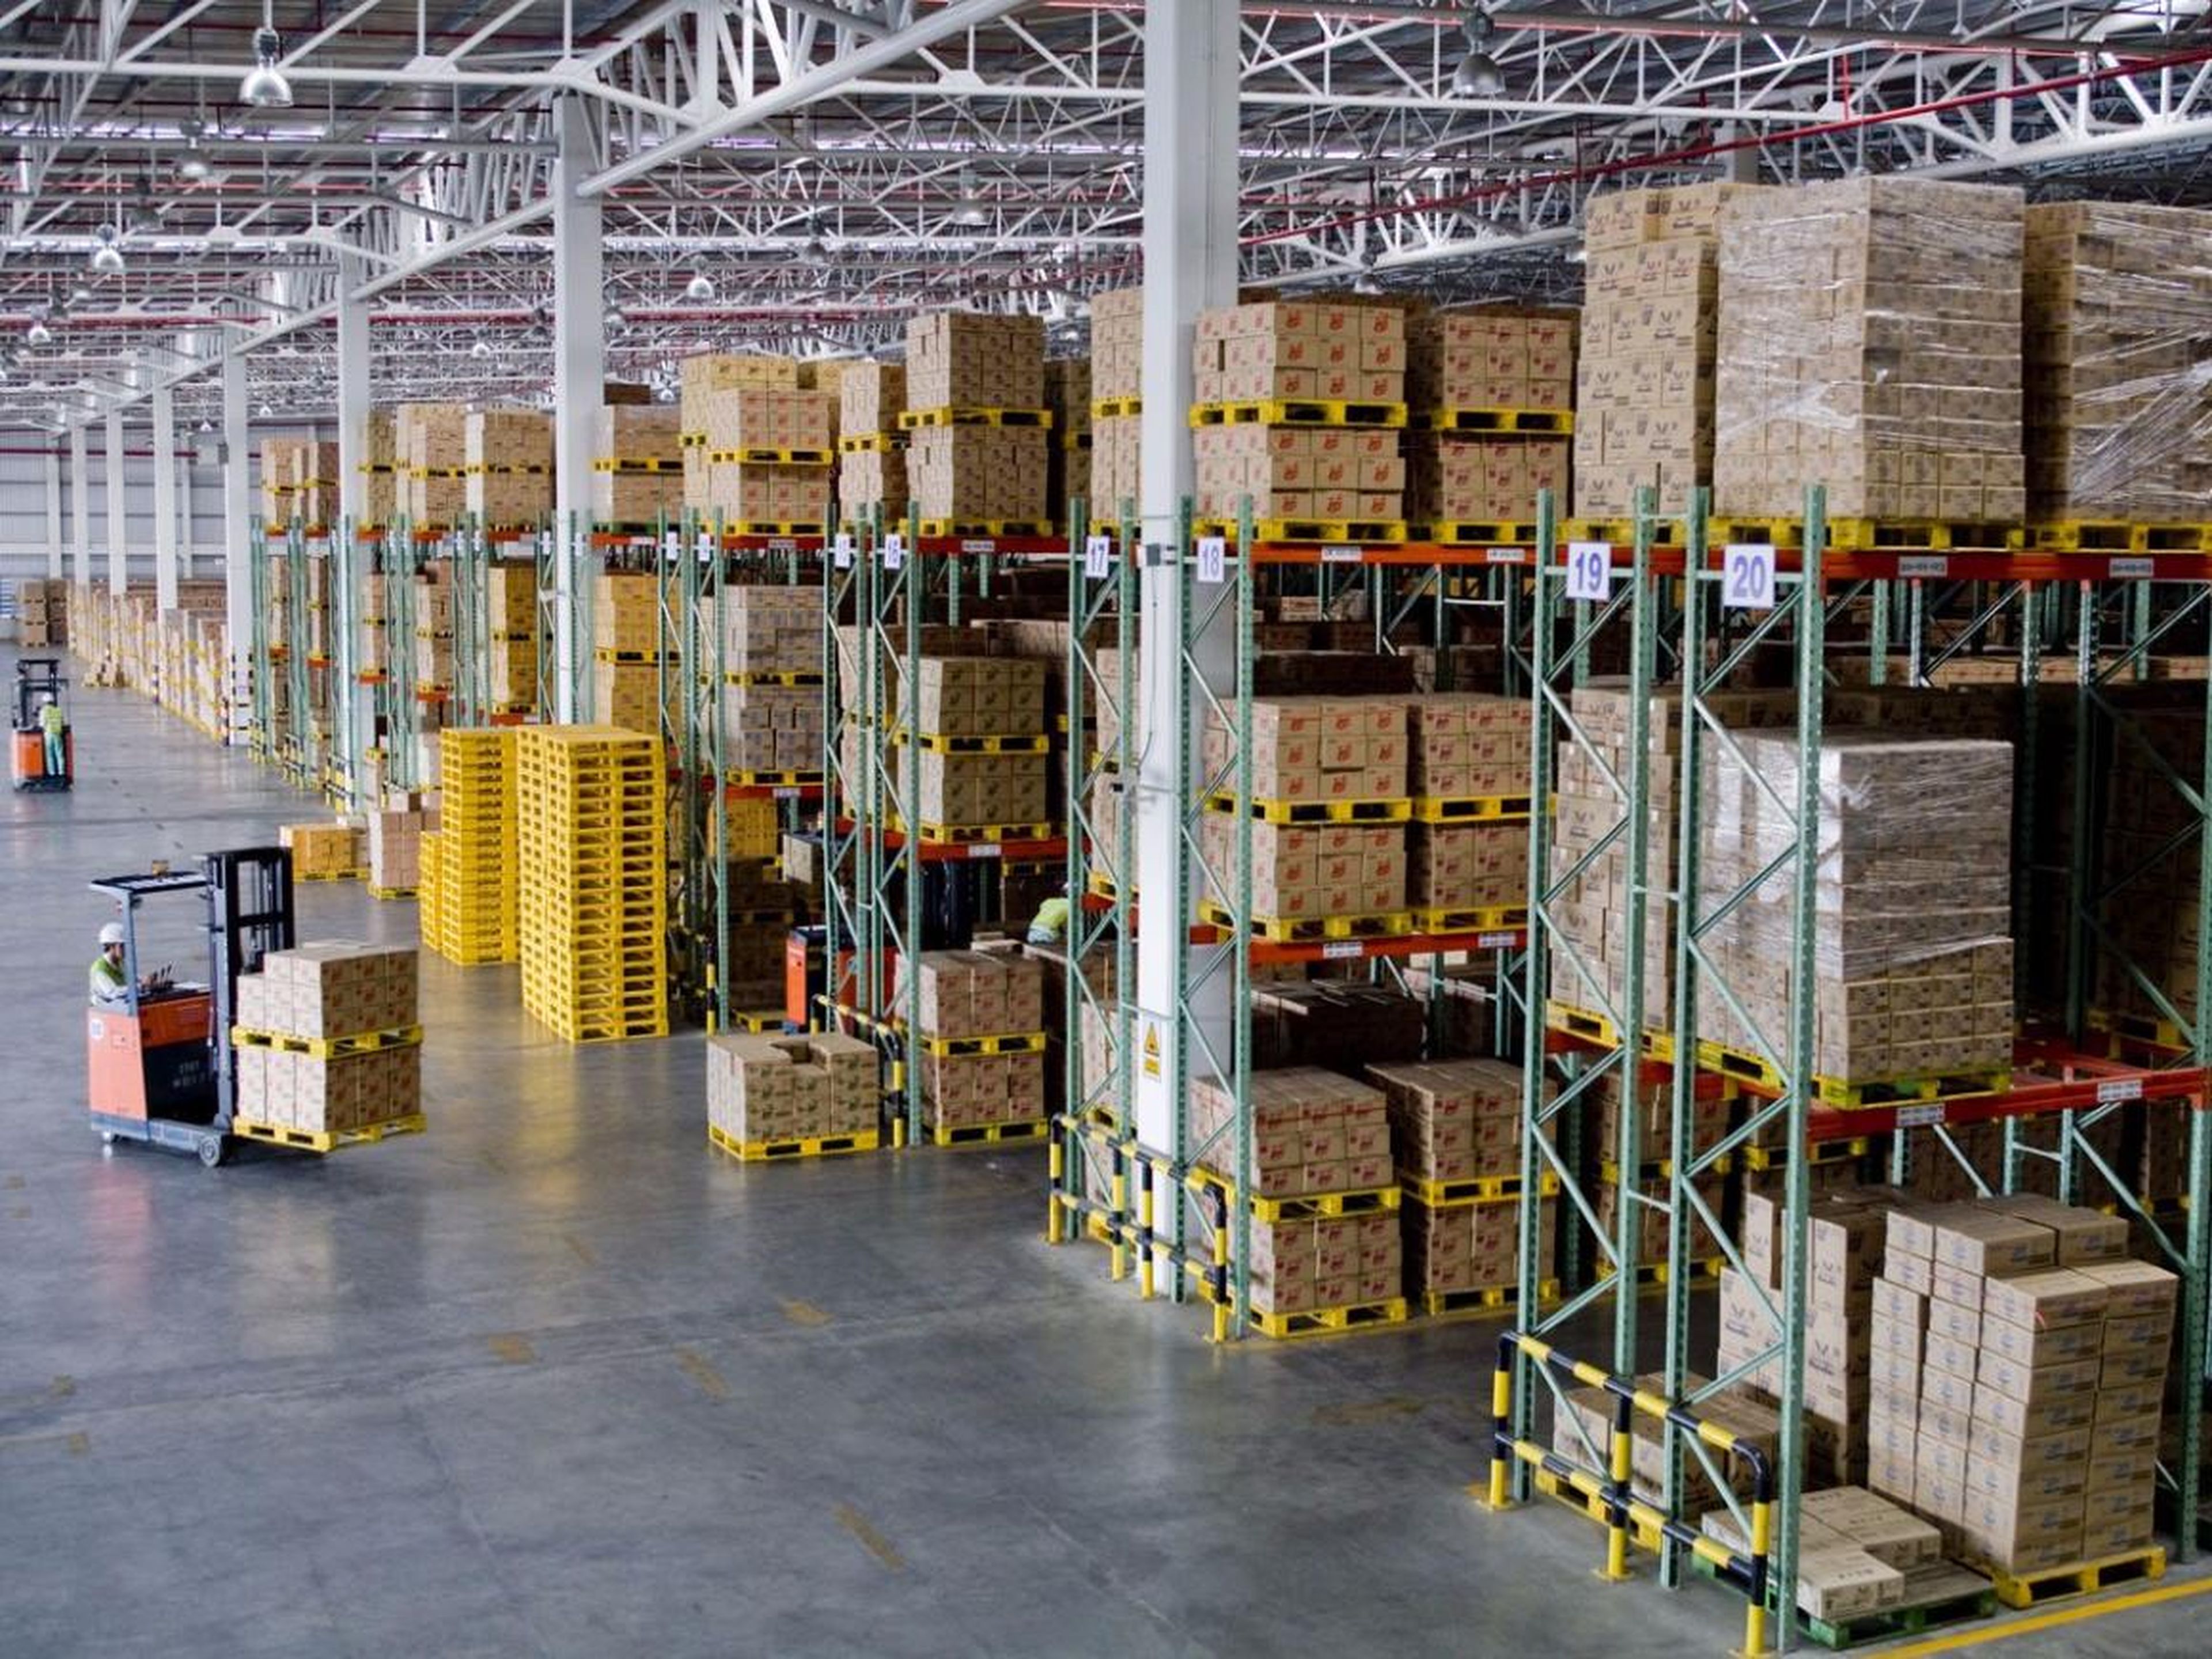 Here's what Amazon's warehouses look like these days.